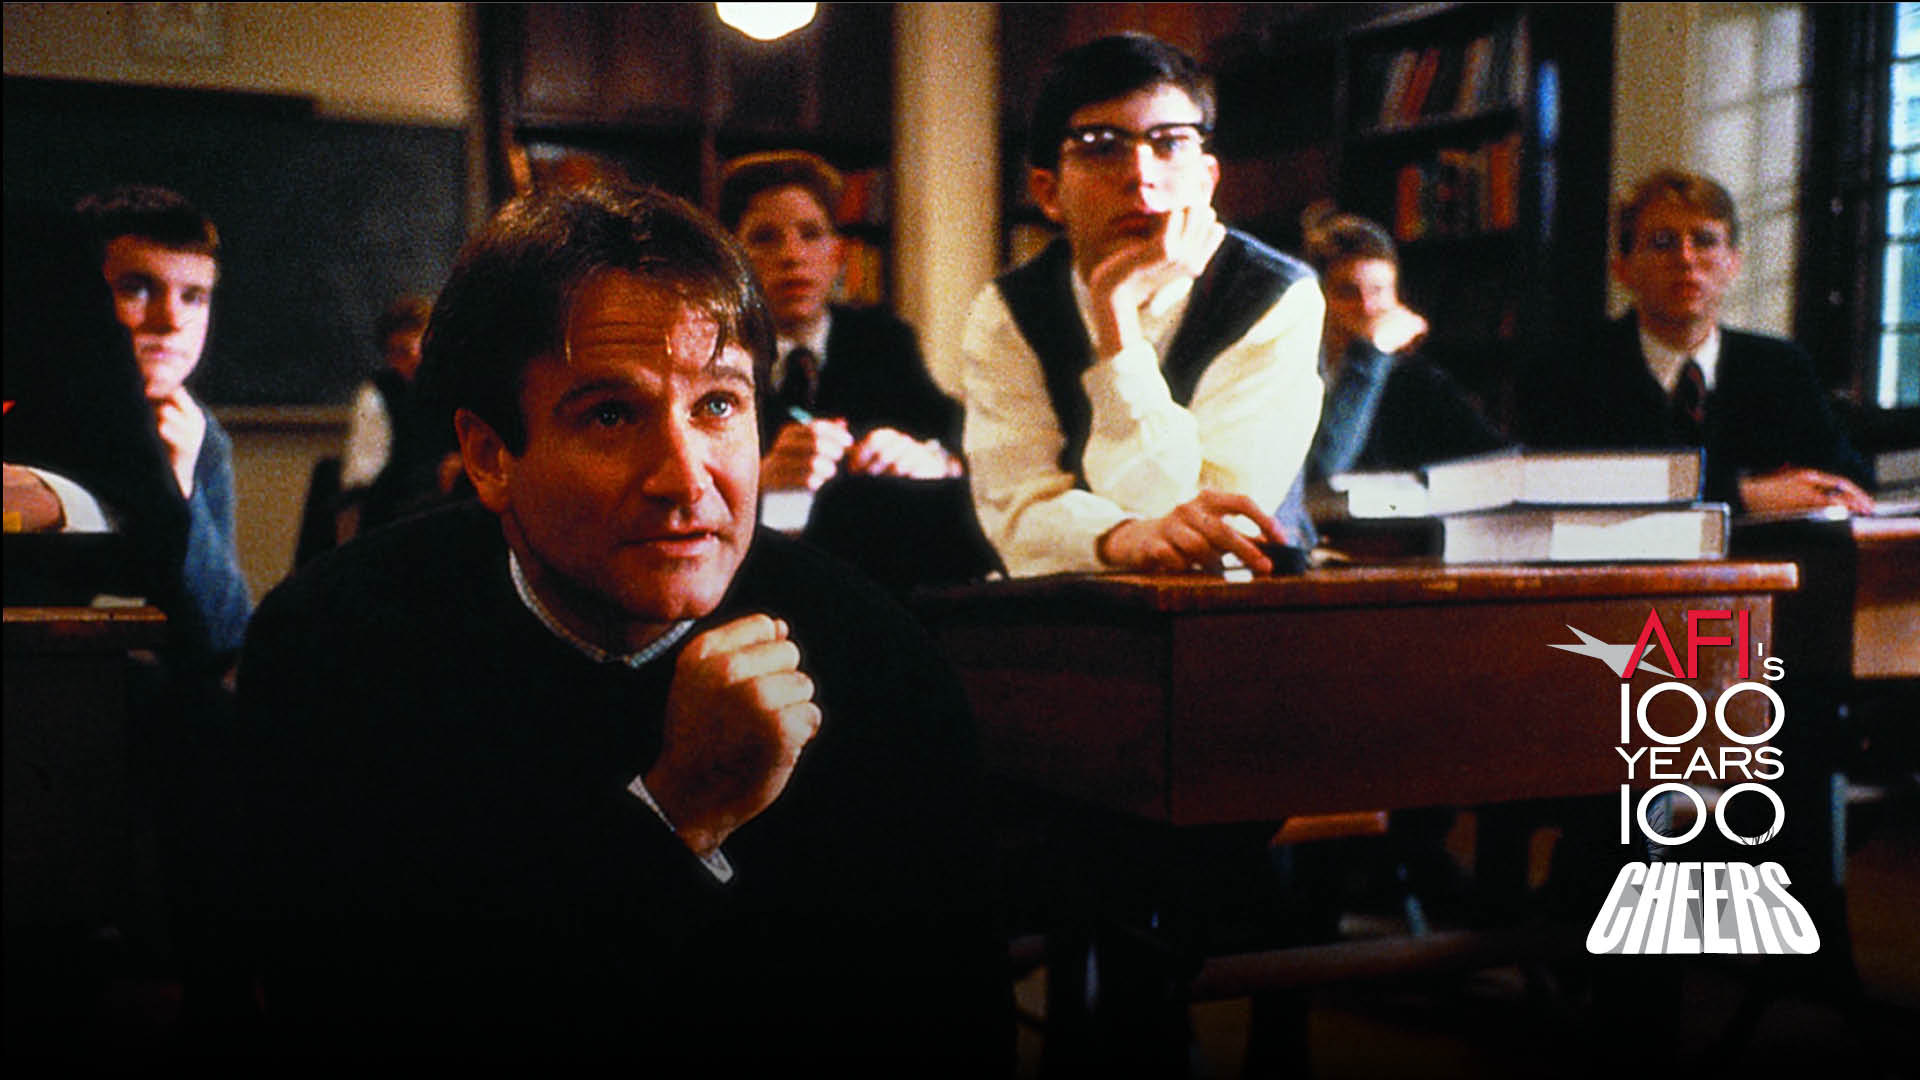 Image from DEAD POETS SOCIETY